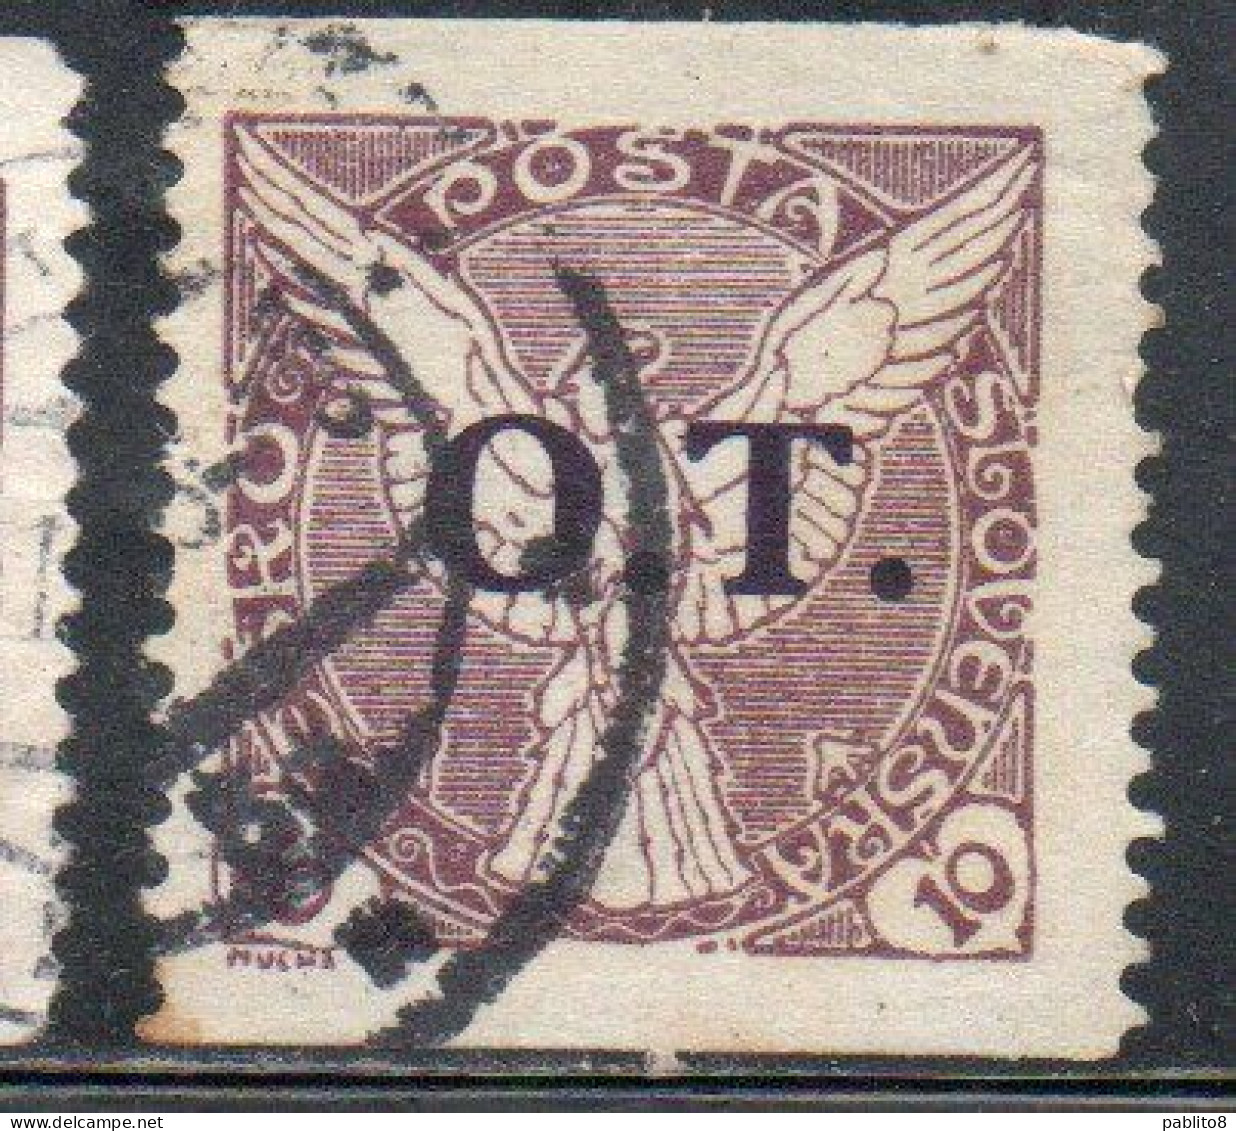 CZECH CECA CZECHOSLOVAKIA CESKA CECOSLOVACCHIA 1934 VARIETY NEWSPAPER STAMP OVERPRINTED OT WINDHOVER 10h USED - Timbres-taxe